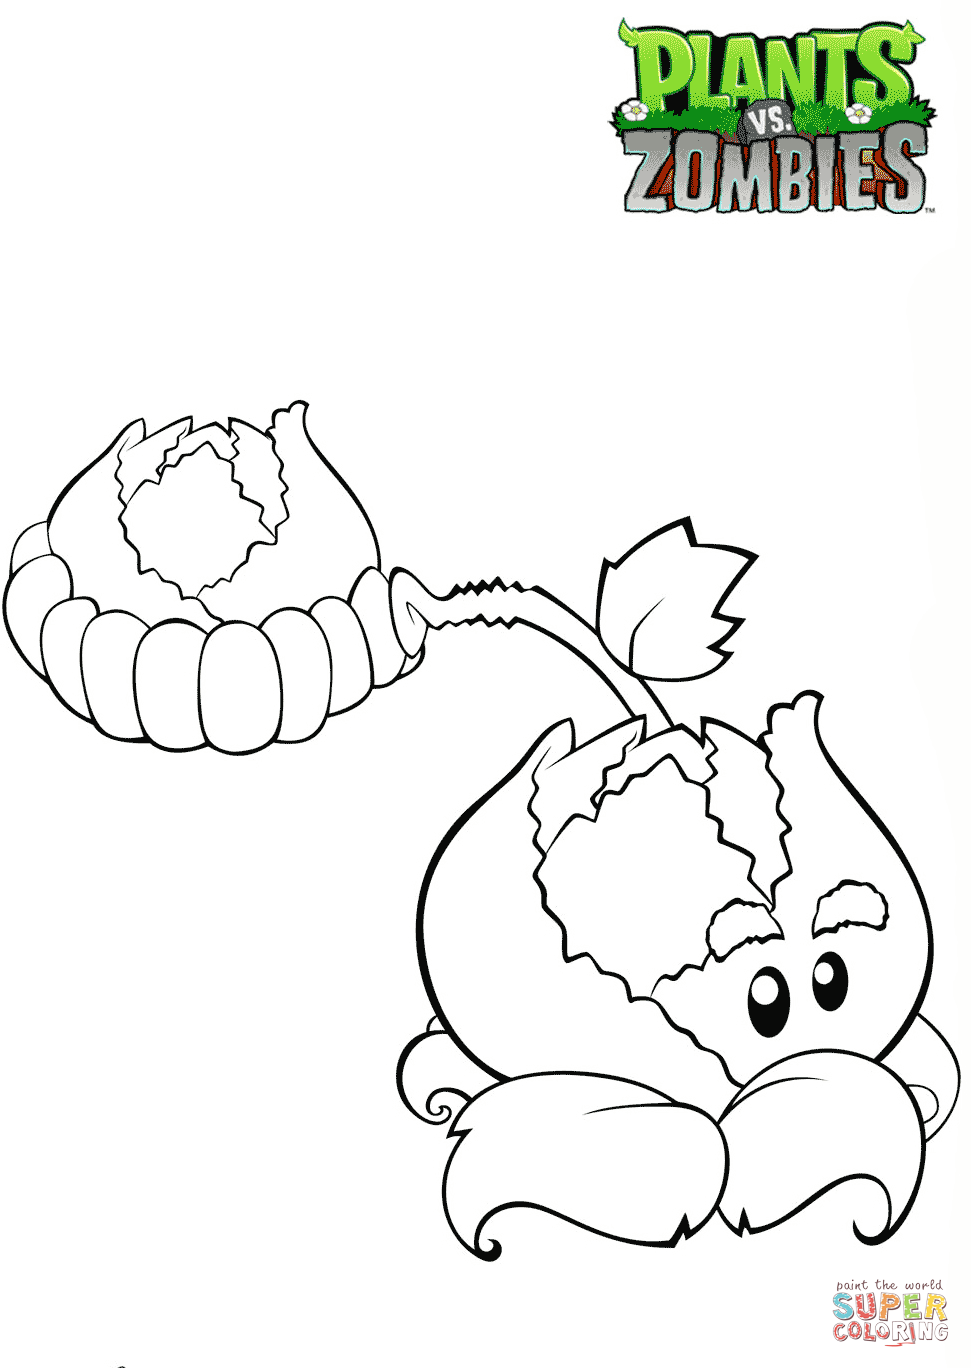 Plants vs zombies cabbage pult coloring page free printable coloring pages